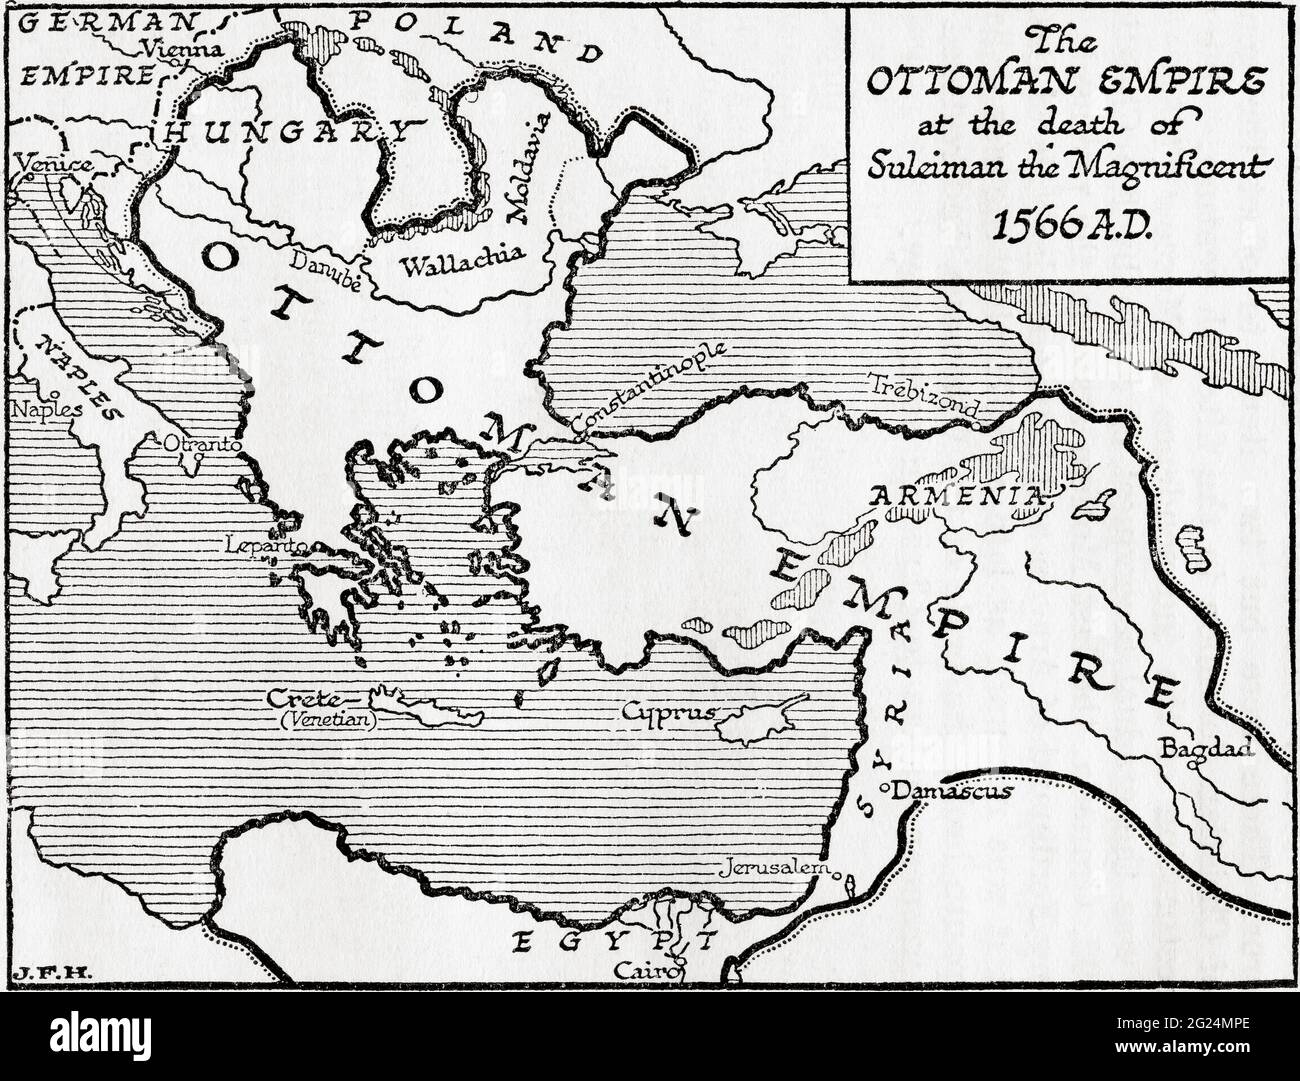 Map showing the Ottoman Empire at the death of Suleiman the Magnificent, 1566.  From A Short History of the World, published c.1936 Stock Photo